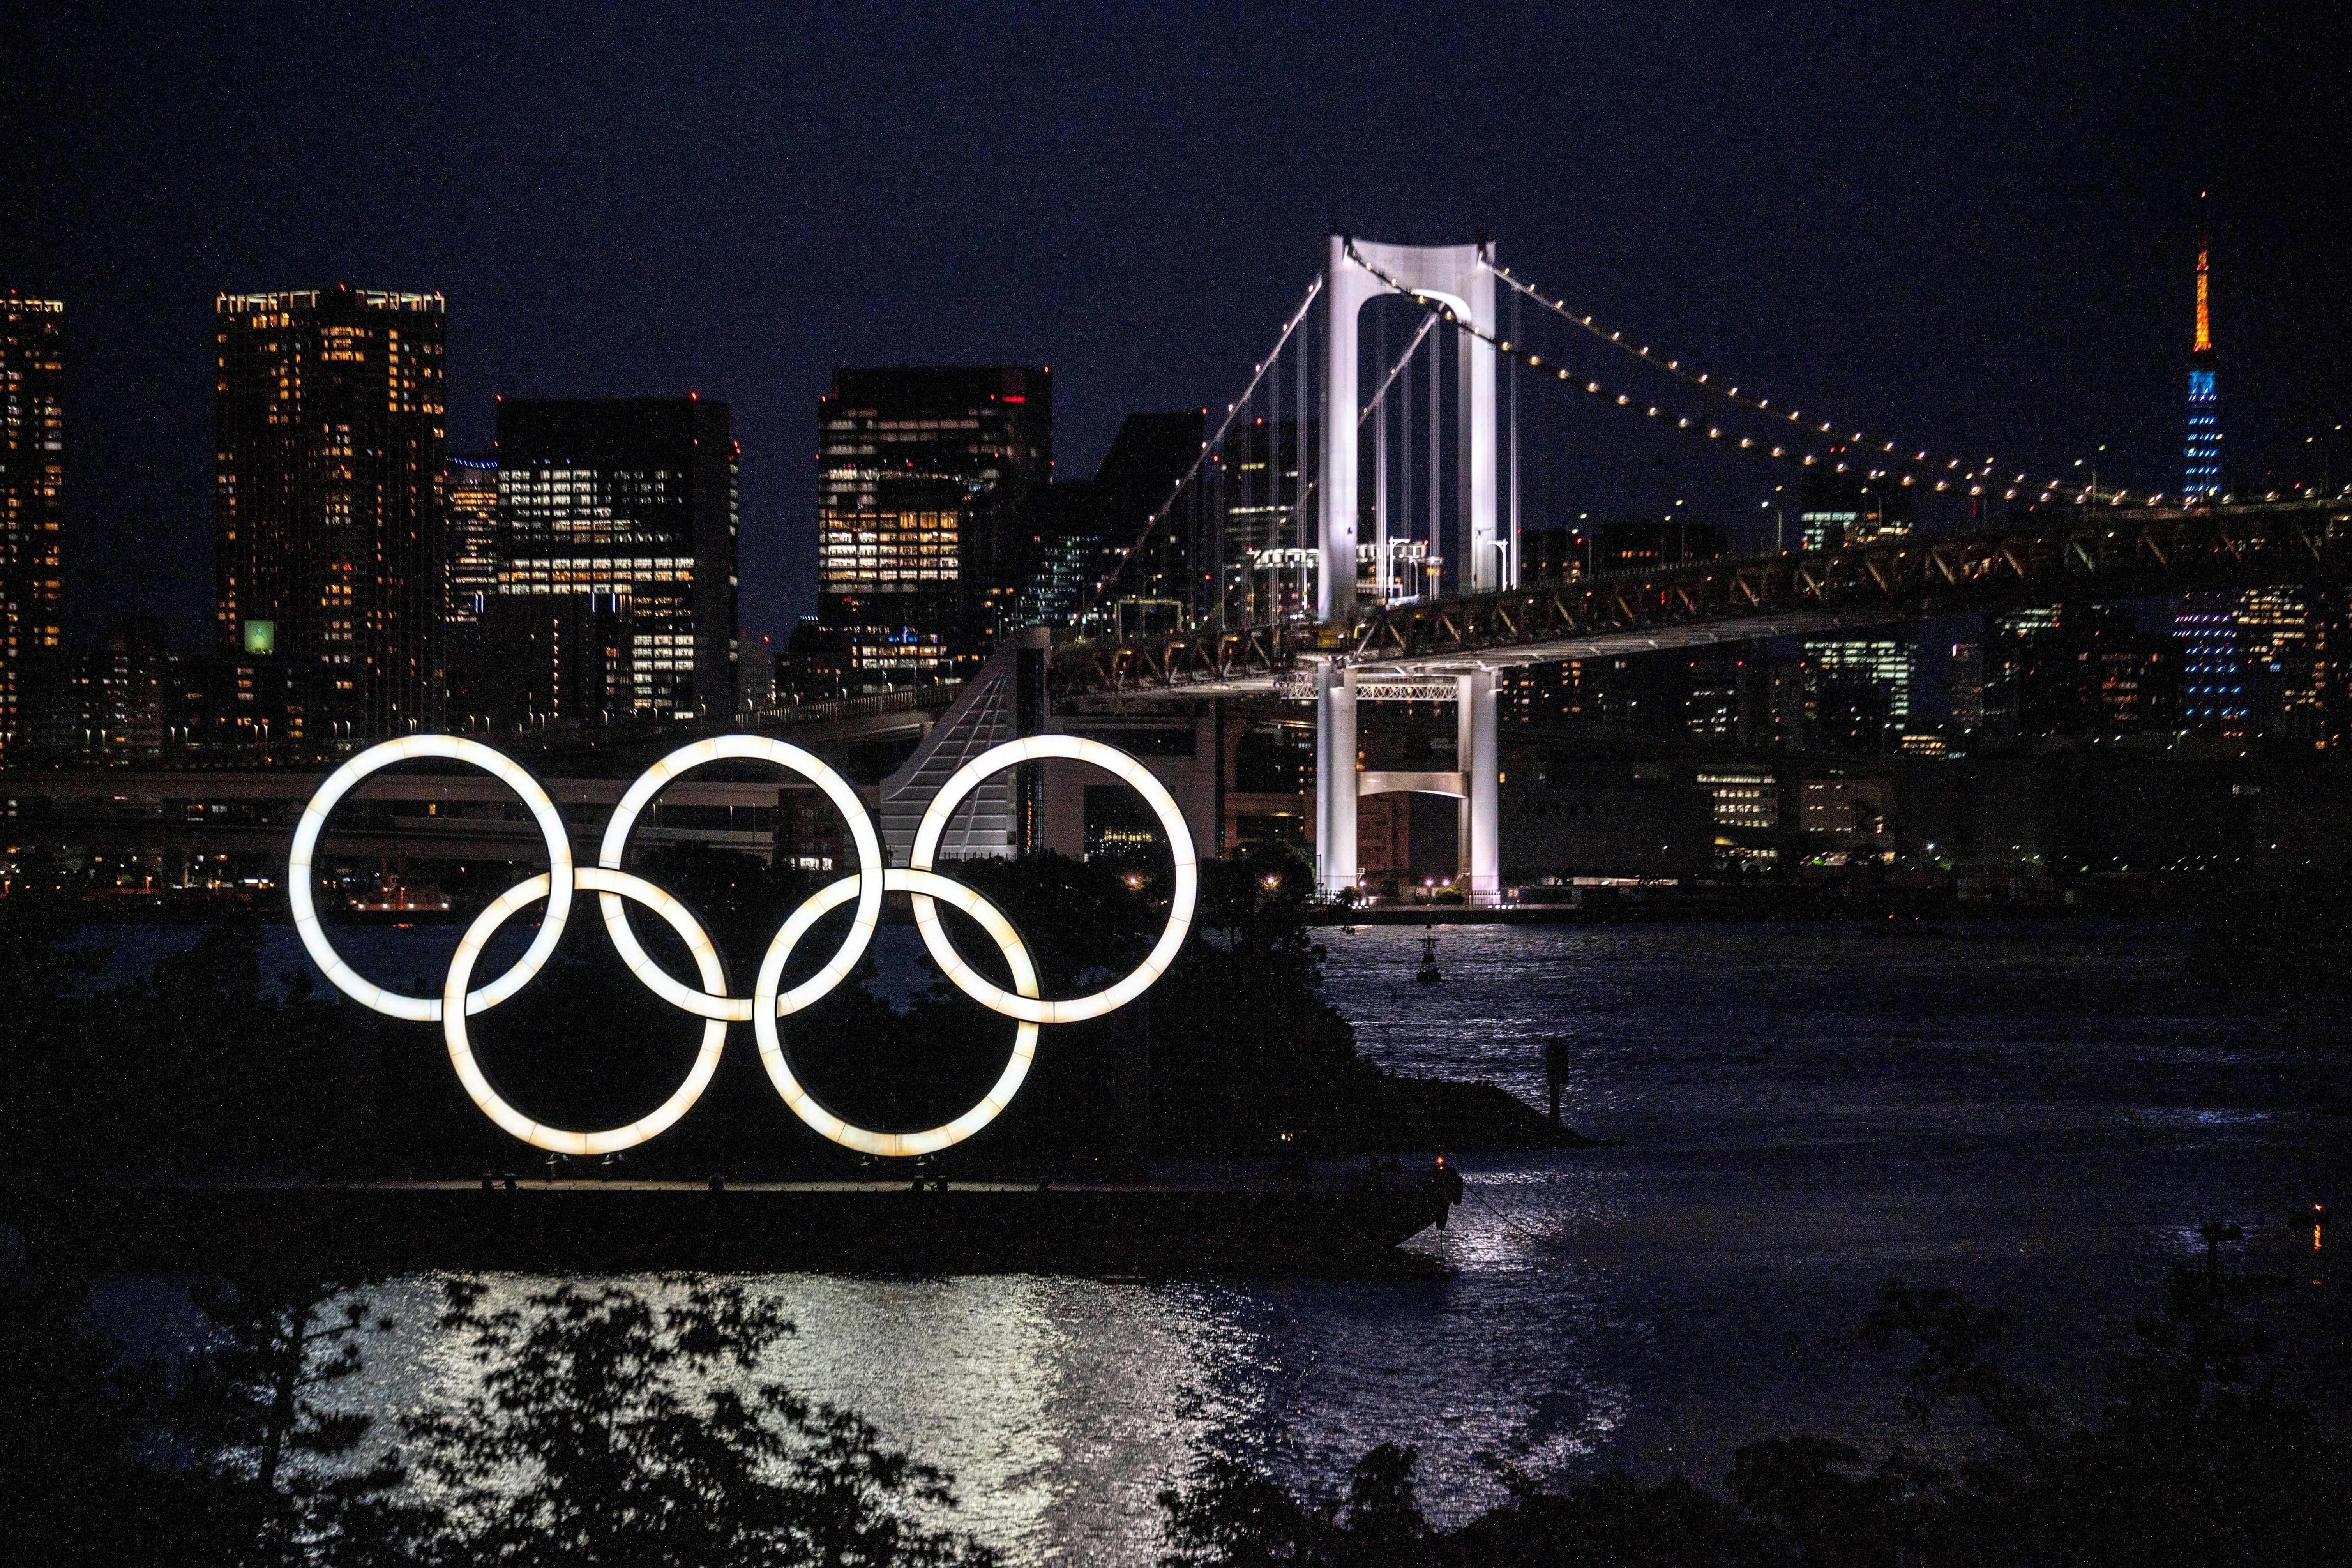 The Olympic rings are seen lit up at a waterfront, in front of a bridge and the Tokyo skyline.